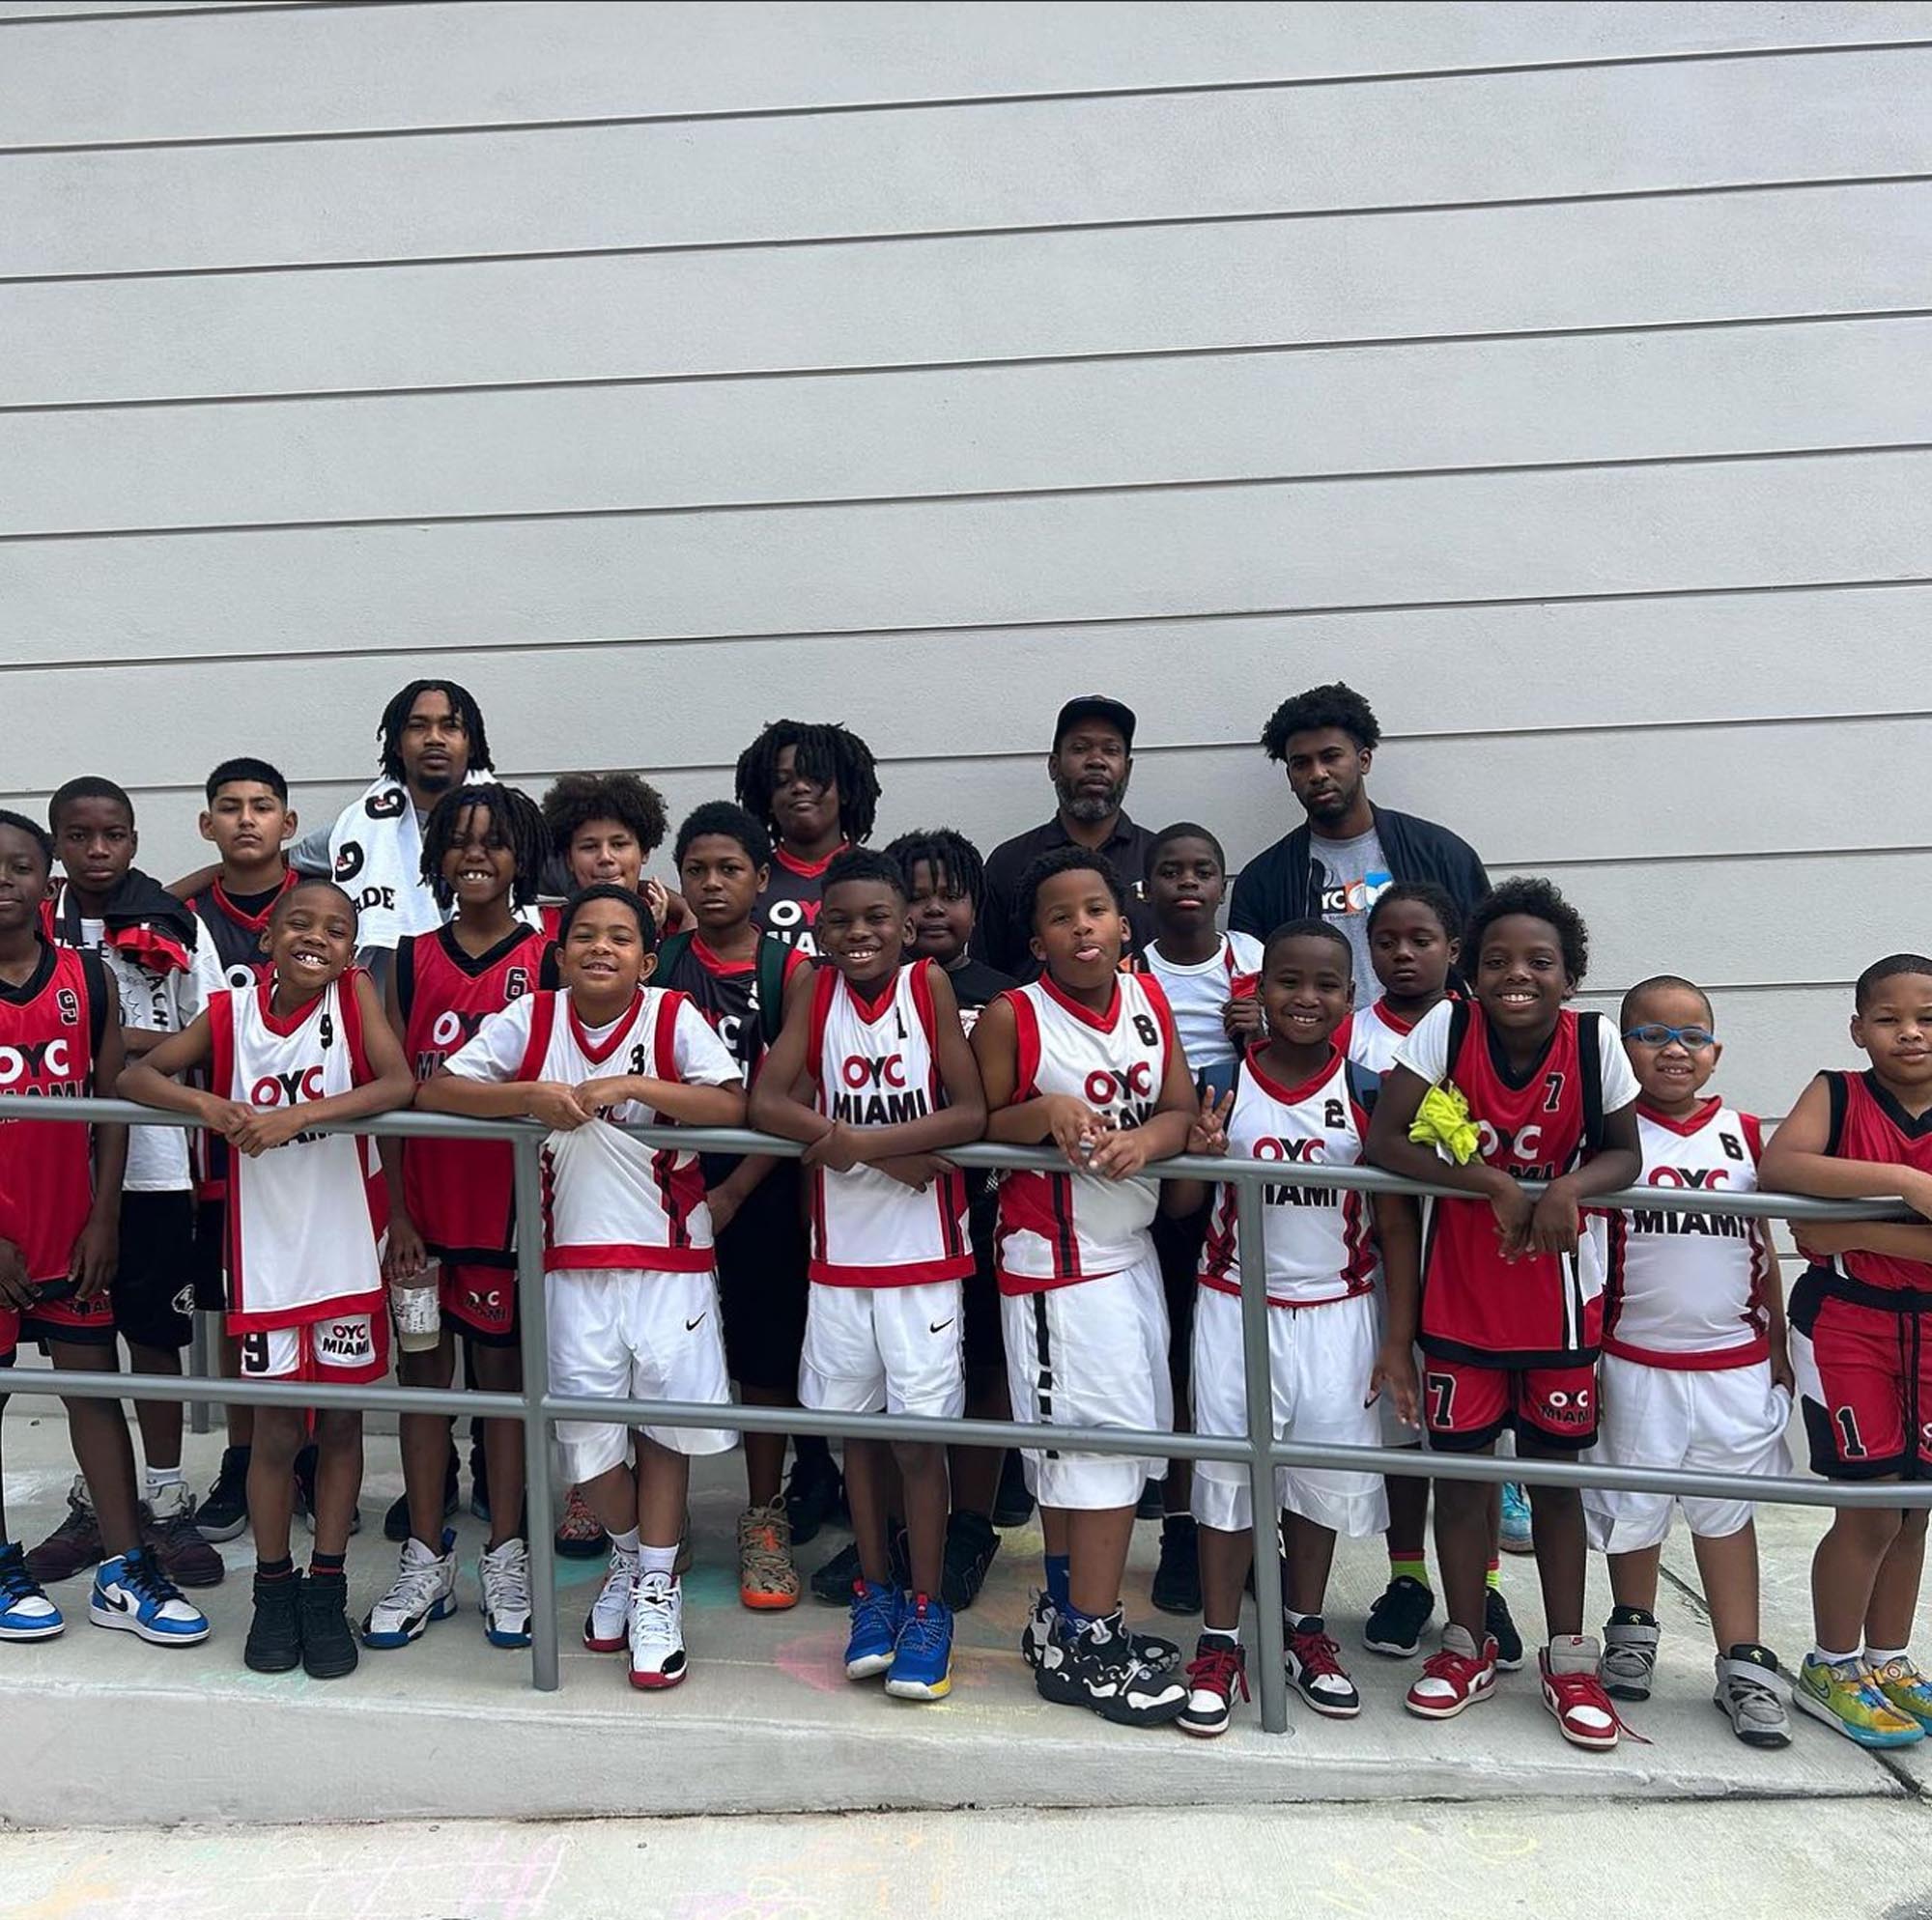 The OYC Youth Basketball team